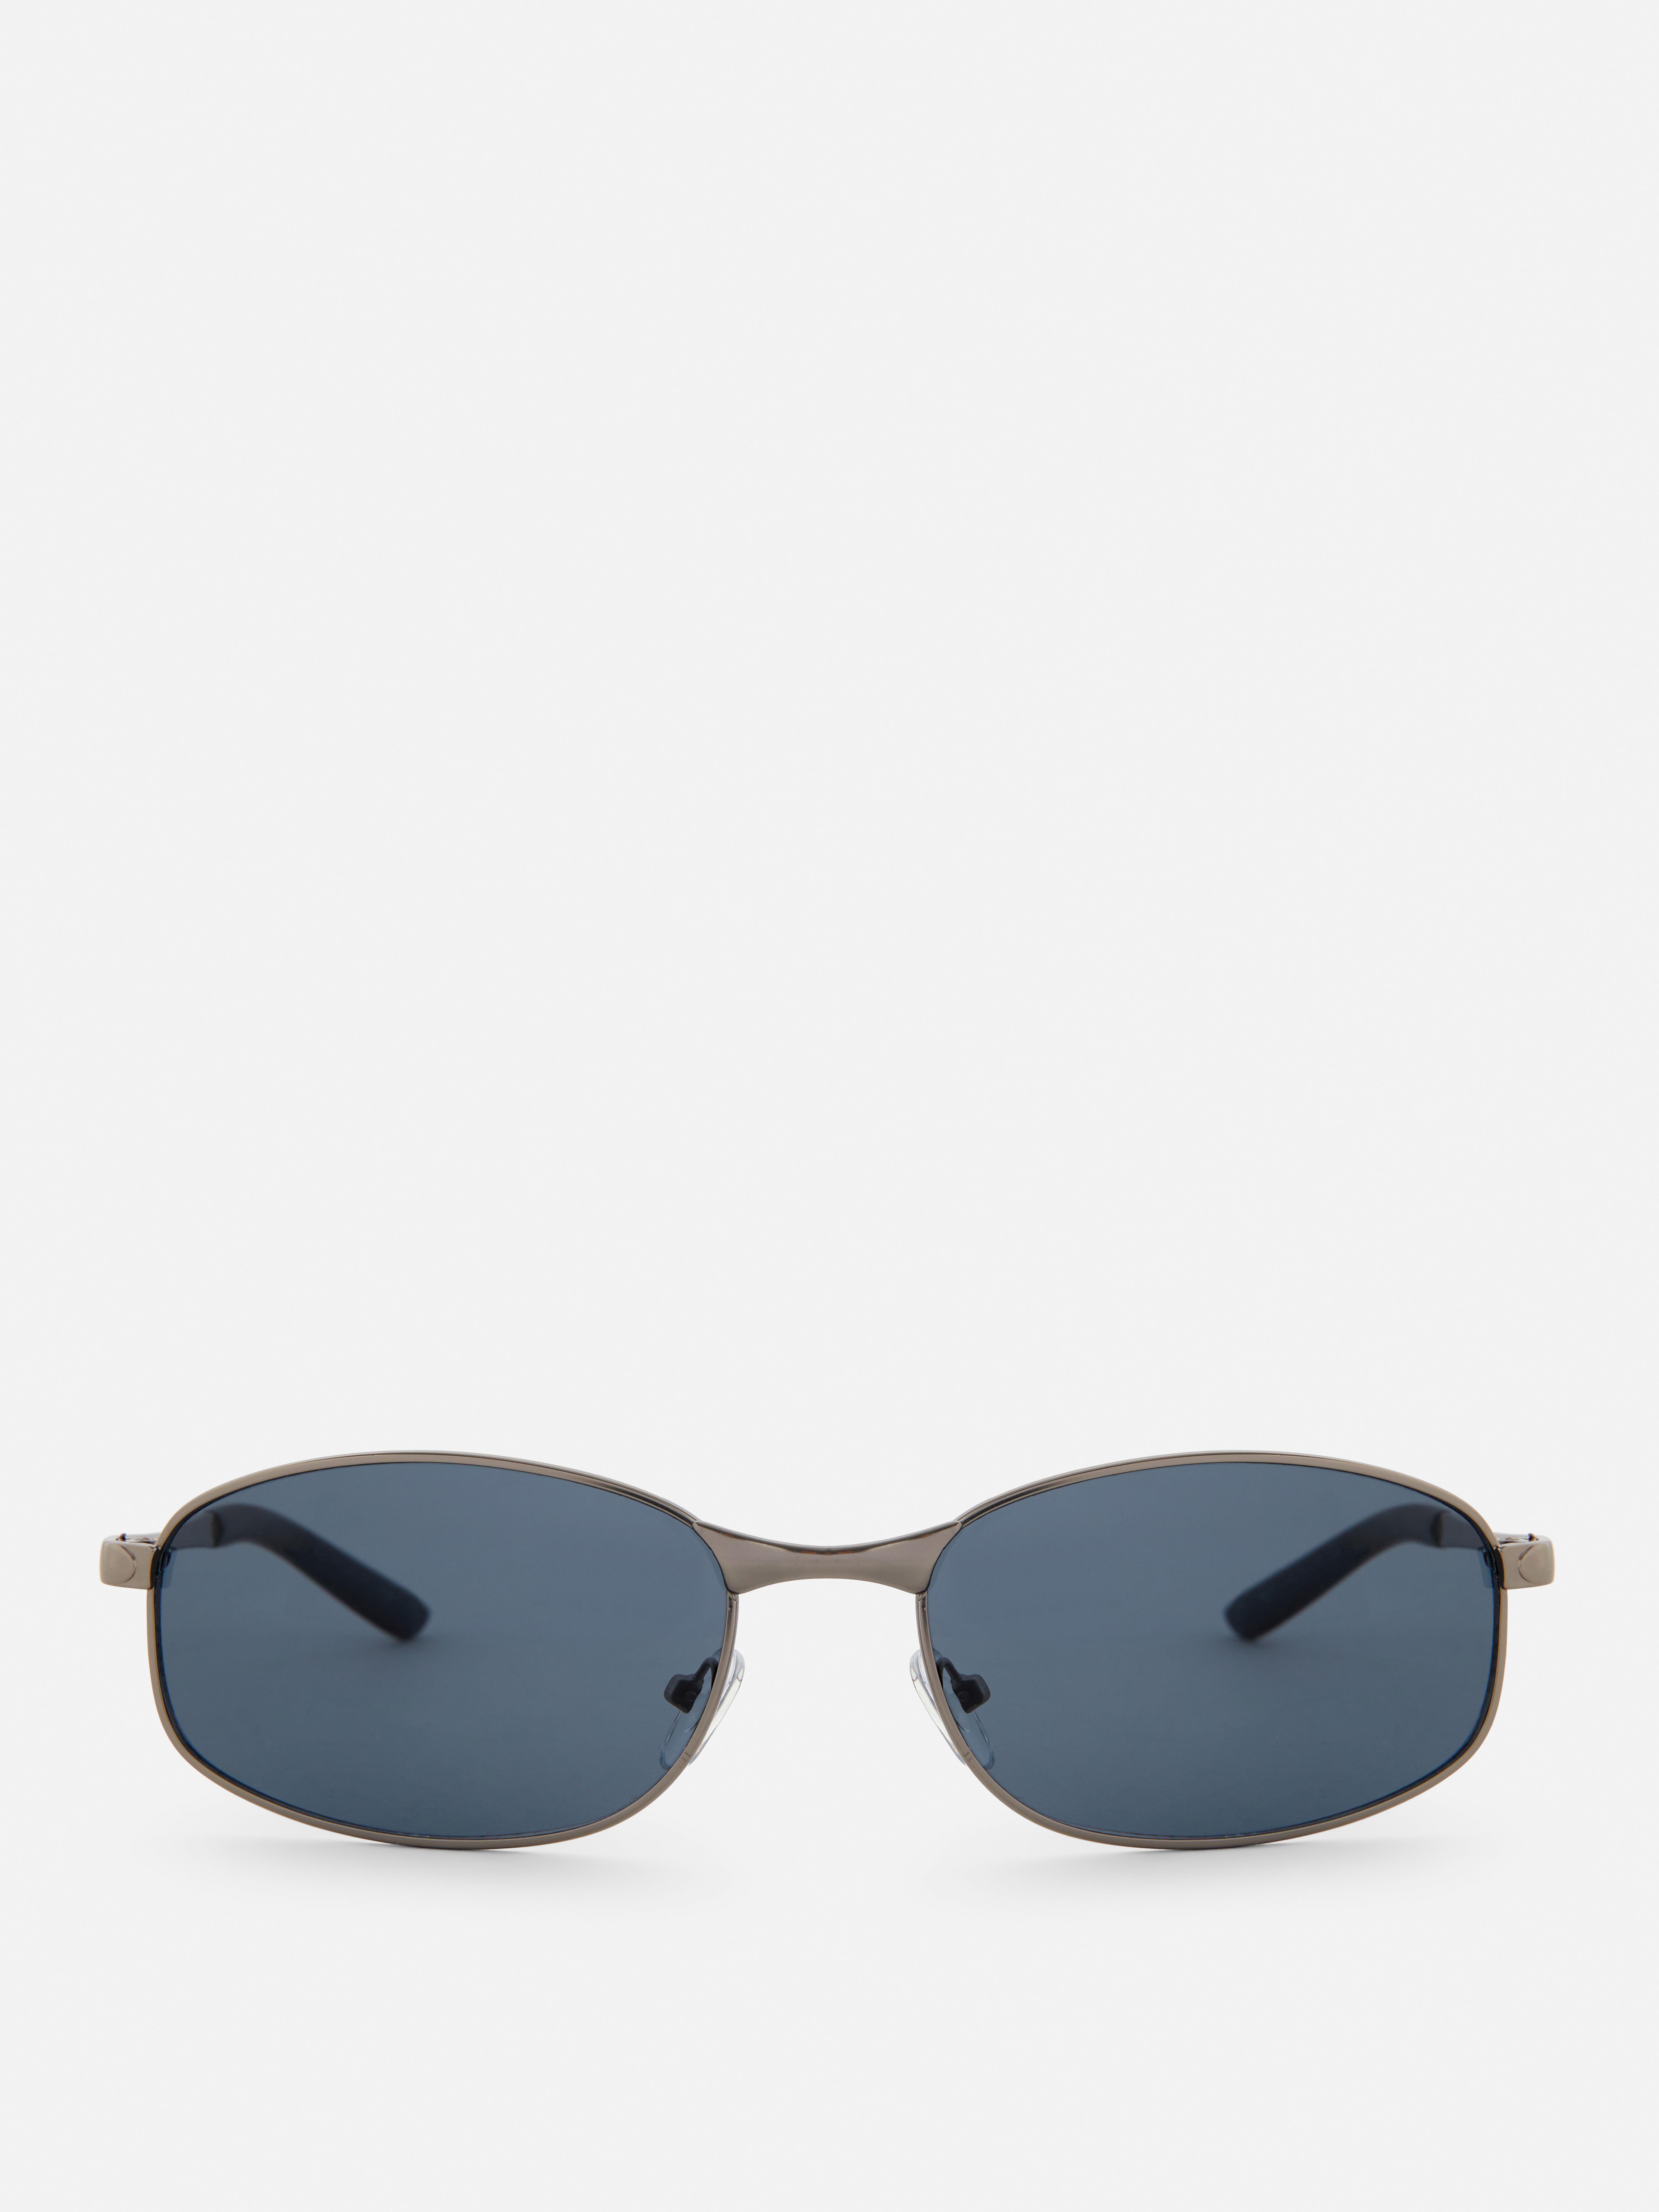 Metal Frame Rounded Sunglasses